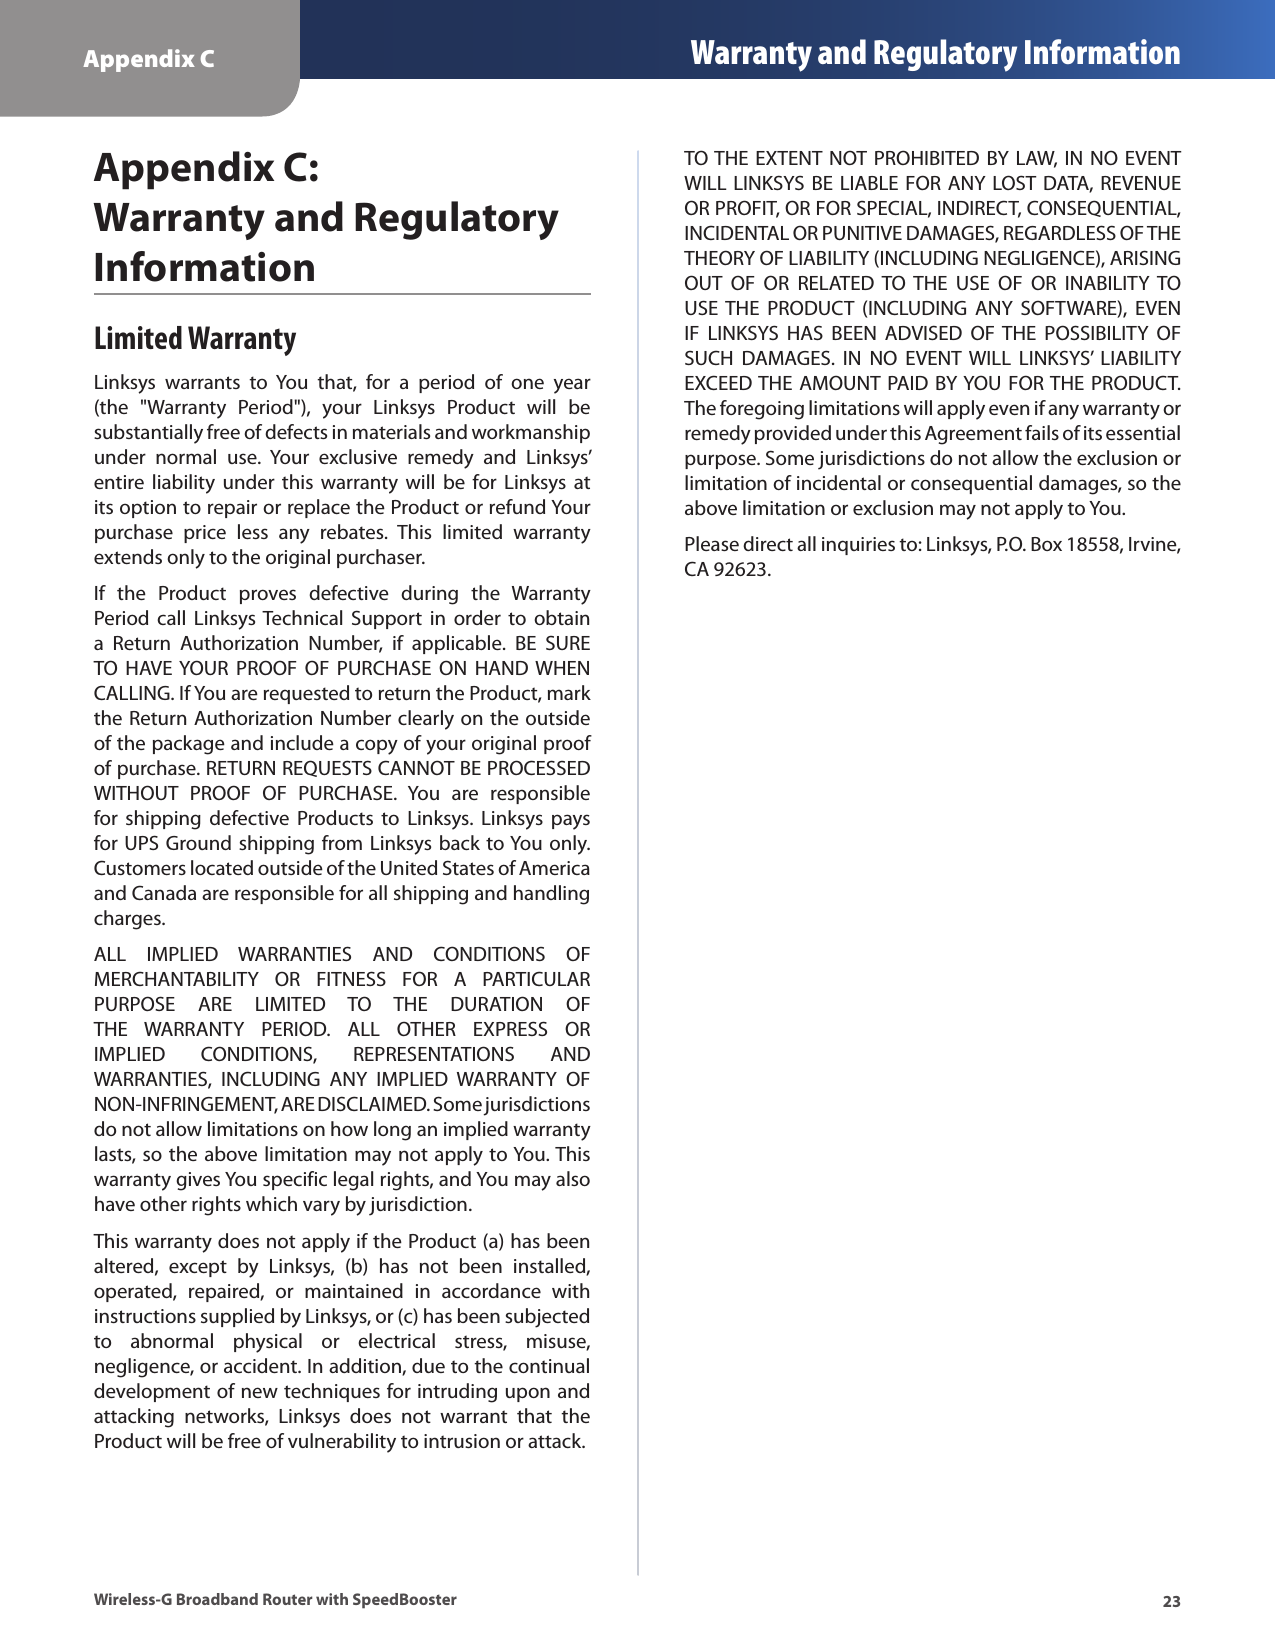 Appendix C Warranty and Regulatory Information23Wireless-G Broadband Router with SpeedBoosterAppendix C:  Warranty and Regulatory InformationLimited WarrantyLinksys  warrants  to  You  that,  for  a  period  of  one  year (the  &quot;Warranty  Period&quot;),  your  Linksys  Product  will  be substantially free of defects in materials and workmanship under  normal  use.  Your  exclusive  remedy  and  Linksys’ entire liability  under  this  warranty  will  be for Linksys  at its option to repair or replace the Product or refund Your purchase  price  less  any  rebates.  This  limited  warranty extends only to the original purchaser. If  the  Product  proves  defective  during  the  Warranty Period call  Linksys Technical  Support  in  order  to  obtain a  Return  Authorization  Number,  if  applicable.  BE  SURE TO  HAVE YOUR PROOF  OF  PURCHASE  ON  HAND WHEN CALLING. If You are requested to return the Product, mark the Return Authorization Number clearly on the outside of the package and include a copy of your original proof of purchase. RETURN REQUESTS CANNOT BE PROCESSED WITHOUT  PROOF  OF  PURCHASE.  You  are  responsible for  shipping  defective  Products  to  Linksys.  Linksys  pays for UPS Ground shipping from Linksys back to You only. Customers located outside of the United States of America and Canada are responsible for all shipping and handling charges. ALL  IMPLIED  WARRANTIES  AND  CONDITIONS  OF MERCHANTABILITY  OR  FITNESS  FOR  A  PARTICULAR PURPOSE  ARE  LIMITED  TO  THE  DURATION  OF THE  WARRANTY  PERIOD.  ALL  OTHER  EXPRESS  OR IMPLIED  CONDITIONS,  REPRESENTATIONS  AND WARRANTIES,  INCLUDING  ANY  IMPLIED  WARRANTY  OF NON-INFRINGEMENT, ARE DISCLAIMED. Some jurisdictions do not allow limitations on how long an implied warranty lasts, so the above limitation may not apply to You. This warranty gives You specific legal rights, and You may also have other rights which vary by jurisdiction.This warranty does not apply if the Product (a) has been altered,  except  by  Linksys,  (b)  has  not  been  installed, operated,  repaired,  or  maintained  in  accordance  with instructions supplied by Linksys, or (c) has been subjected to  abnormal  physical  or  electrical  stress,  misuse, negligence, or accident. In addition, due to the continual development of new techniques for intruding upon and attacking  networks,  Linksys  does  not  warrant  that  the Product will be free of vulnerability to intrusion or attack.TO THE EXTENT NOT PROHIBITED BY  LAW, IN NO EVENT WILL LINKSYS  BE LIABLE FOR ANY LOST DATA, REVENUE OR PROFIT, OR FOR SPECIAL, INDIRECT, CONSEQUENTIAL, INCIDENTAL OR PUNITIVE DAMAGES, REGARDLESS OF THE THEORY OF LIABILITY (INCLUDING NEGLIGENCE), ARISING OUT  OF  OR  RELATED  TO  THE  USE  OF  OR  INABILITY  TO USE THE  PRODUCT  (INCLUDING  ANY  SOFTWARE),  EVEN IF  LINKSYS  HAS  BEEN  ADVISED  OF THE  POSSIBILITY  OF SUCH  DAMAGES.  IN  NO  EVENT  WILL  LINKSYS’  LIABILITY EXCEED THE AMOUNT PAID BY YOU FOR THE PRODUCT. The foregoing limitations will apply even if any warranty or remedy provided under this Agreement fails of its essential purpose. Some jurisdictions do not allow the exclusion or limitation of incidental or consequential damages, so the above limitation or exclusion may not apply to You.Please direct all inquiries to: Linksys, P.O. Box 18558, Irvine, CA 92623.